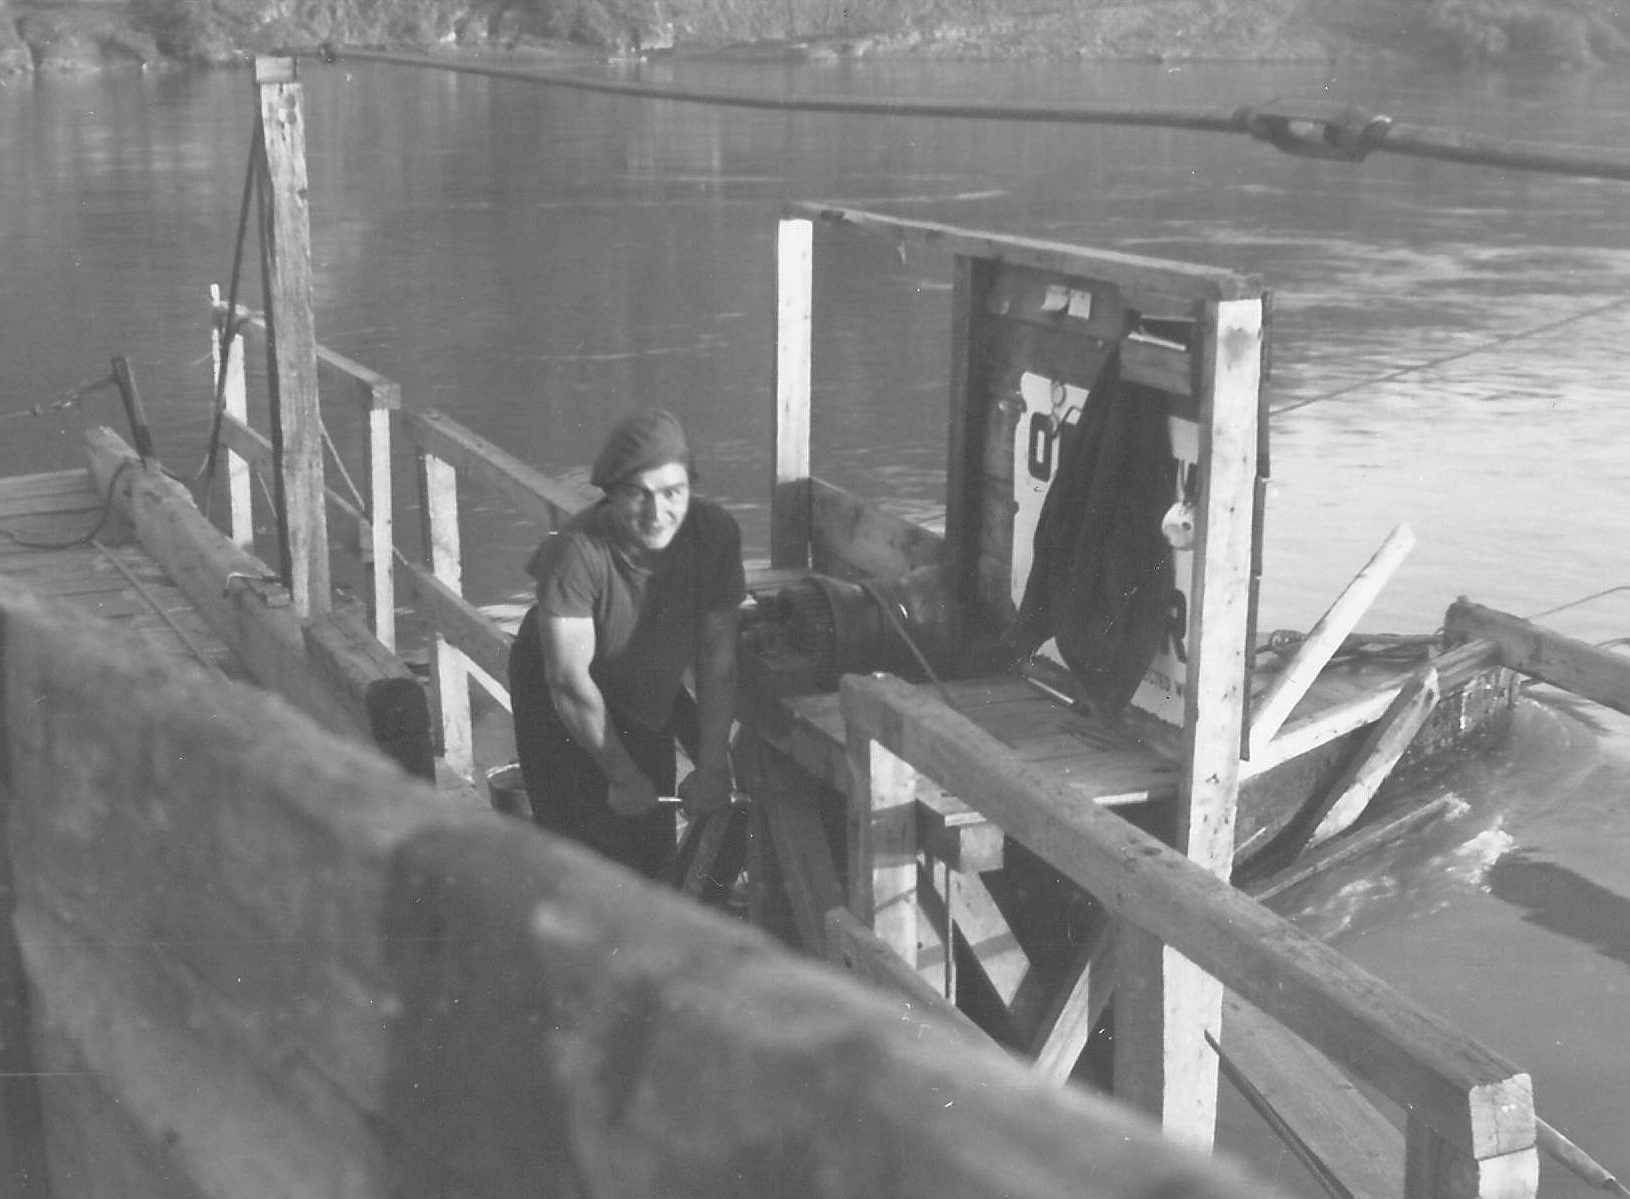 This fellow appears to be the ferry operator on the second edition of the Fort Vermilion ferry This ferry operated just downriver from where the bridge stands today - the first edition crossed the River opposite the Old Bay House. He appears to be cranking on a lever that winds up the end board of the ferry to prevent wagons and trucks from rolling off. The photo was taken by Gwyn Bailey Cook who was the teacher at Lambert point school for the 1948 school year!
990.4.3.49 / Gwyn Bailey Cook